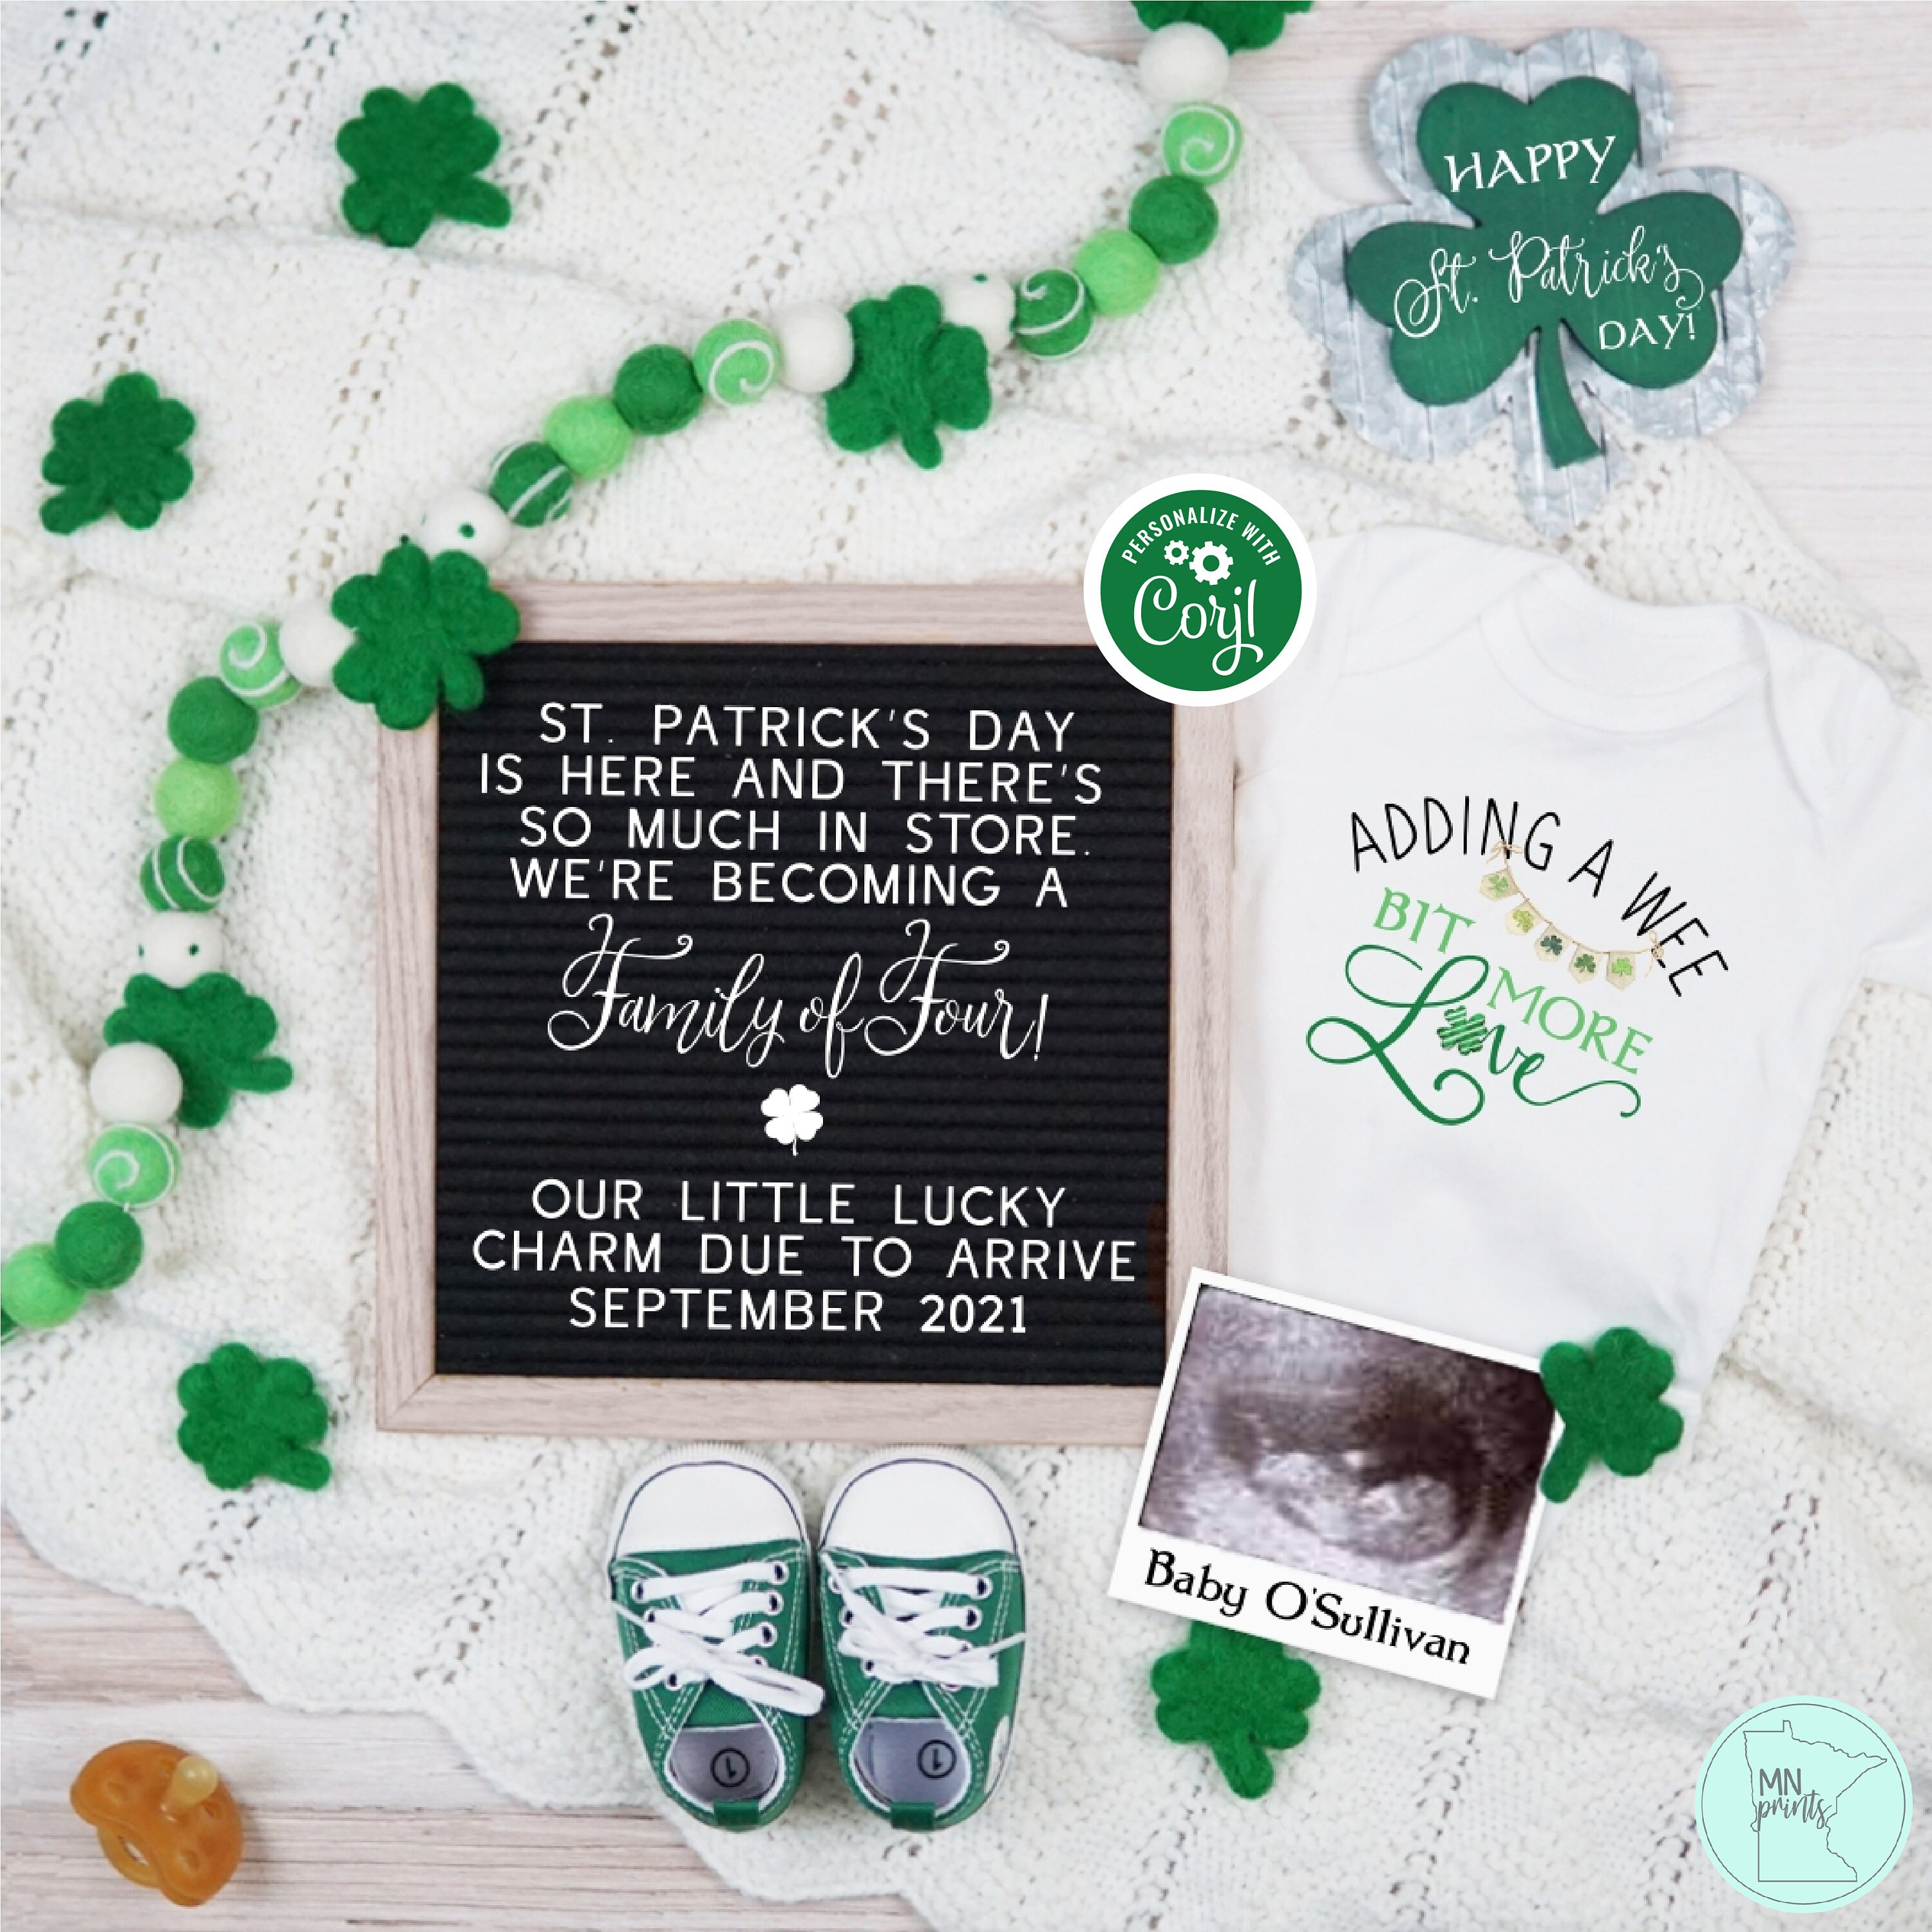 Digital Pregnancy and baby announcement with editable template and ultrasound and St Patrick's themed